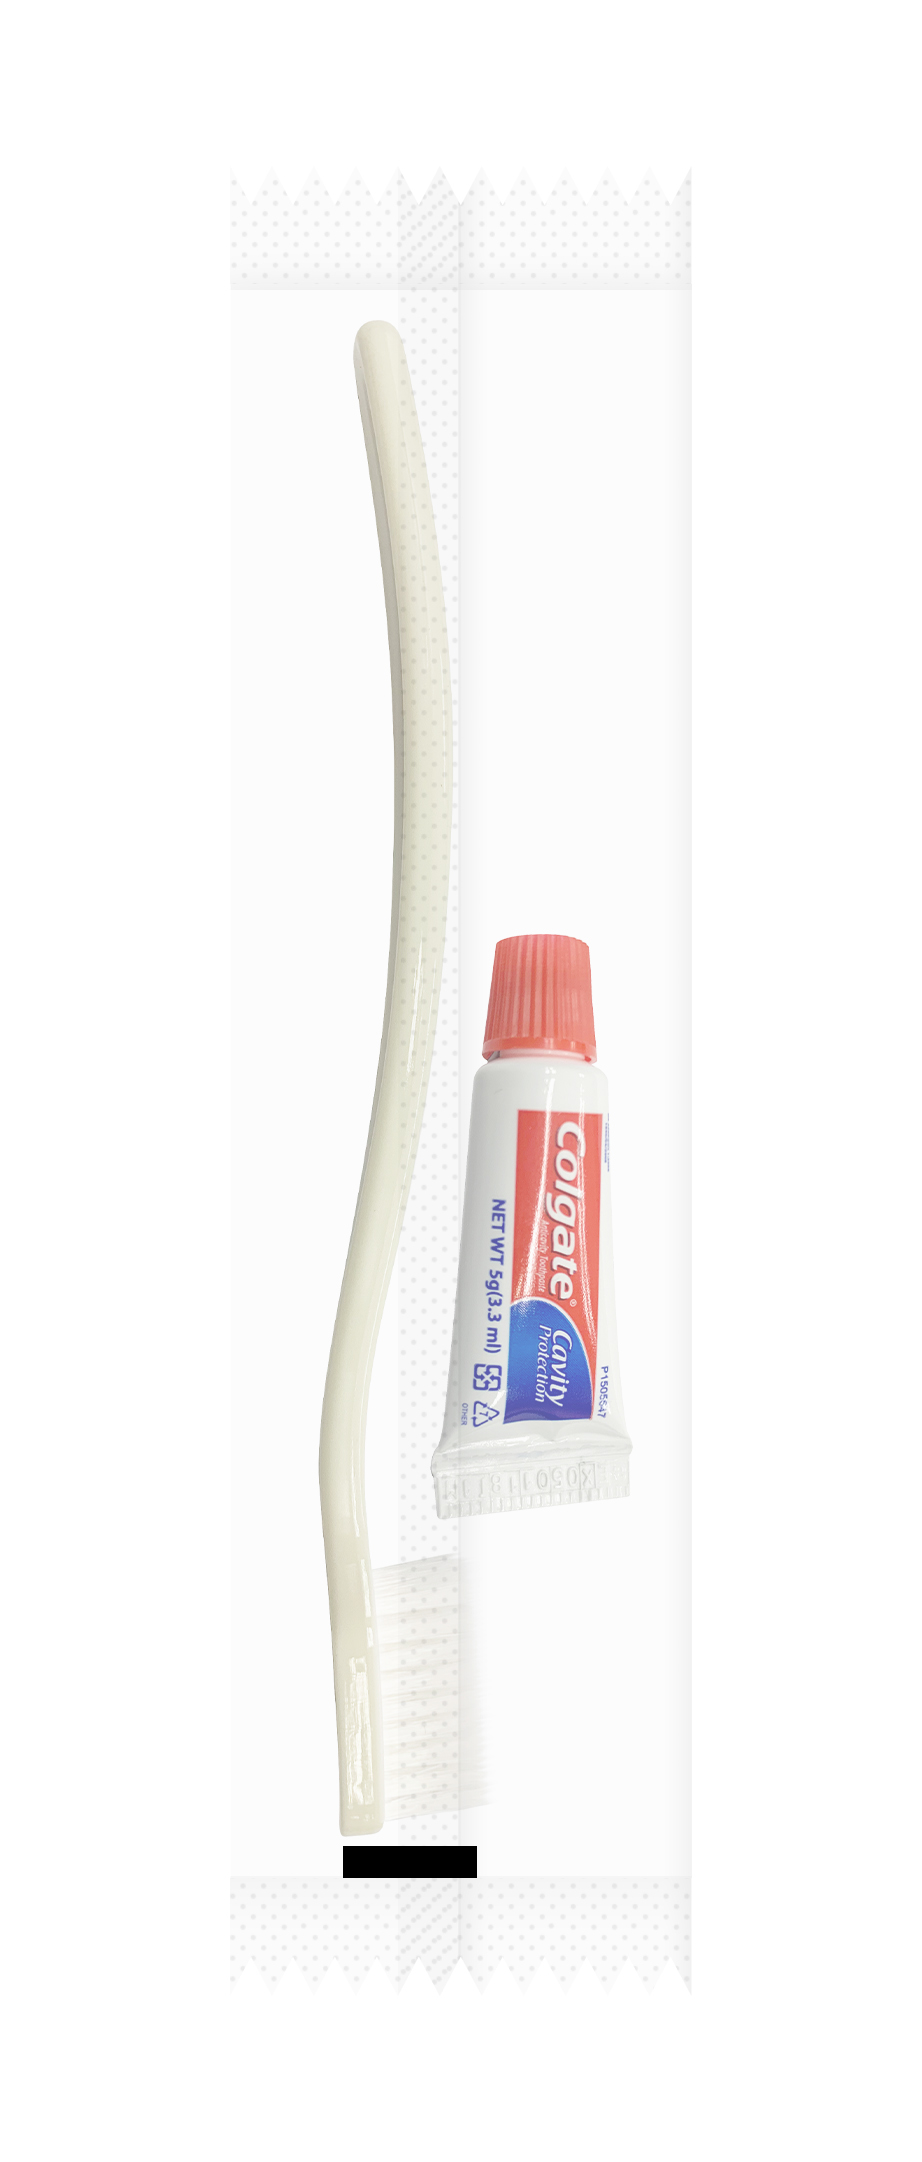 Toothbrush and tube